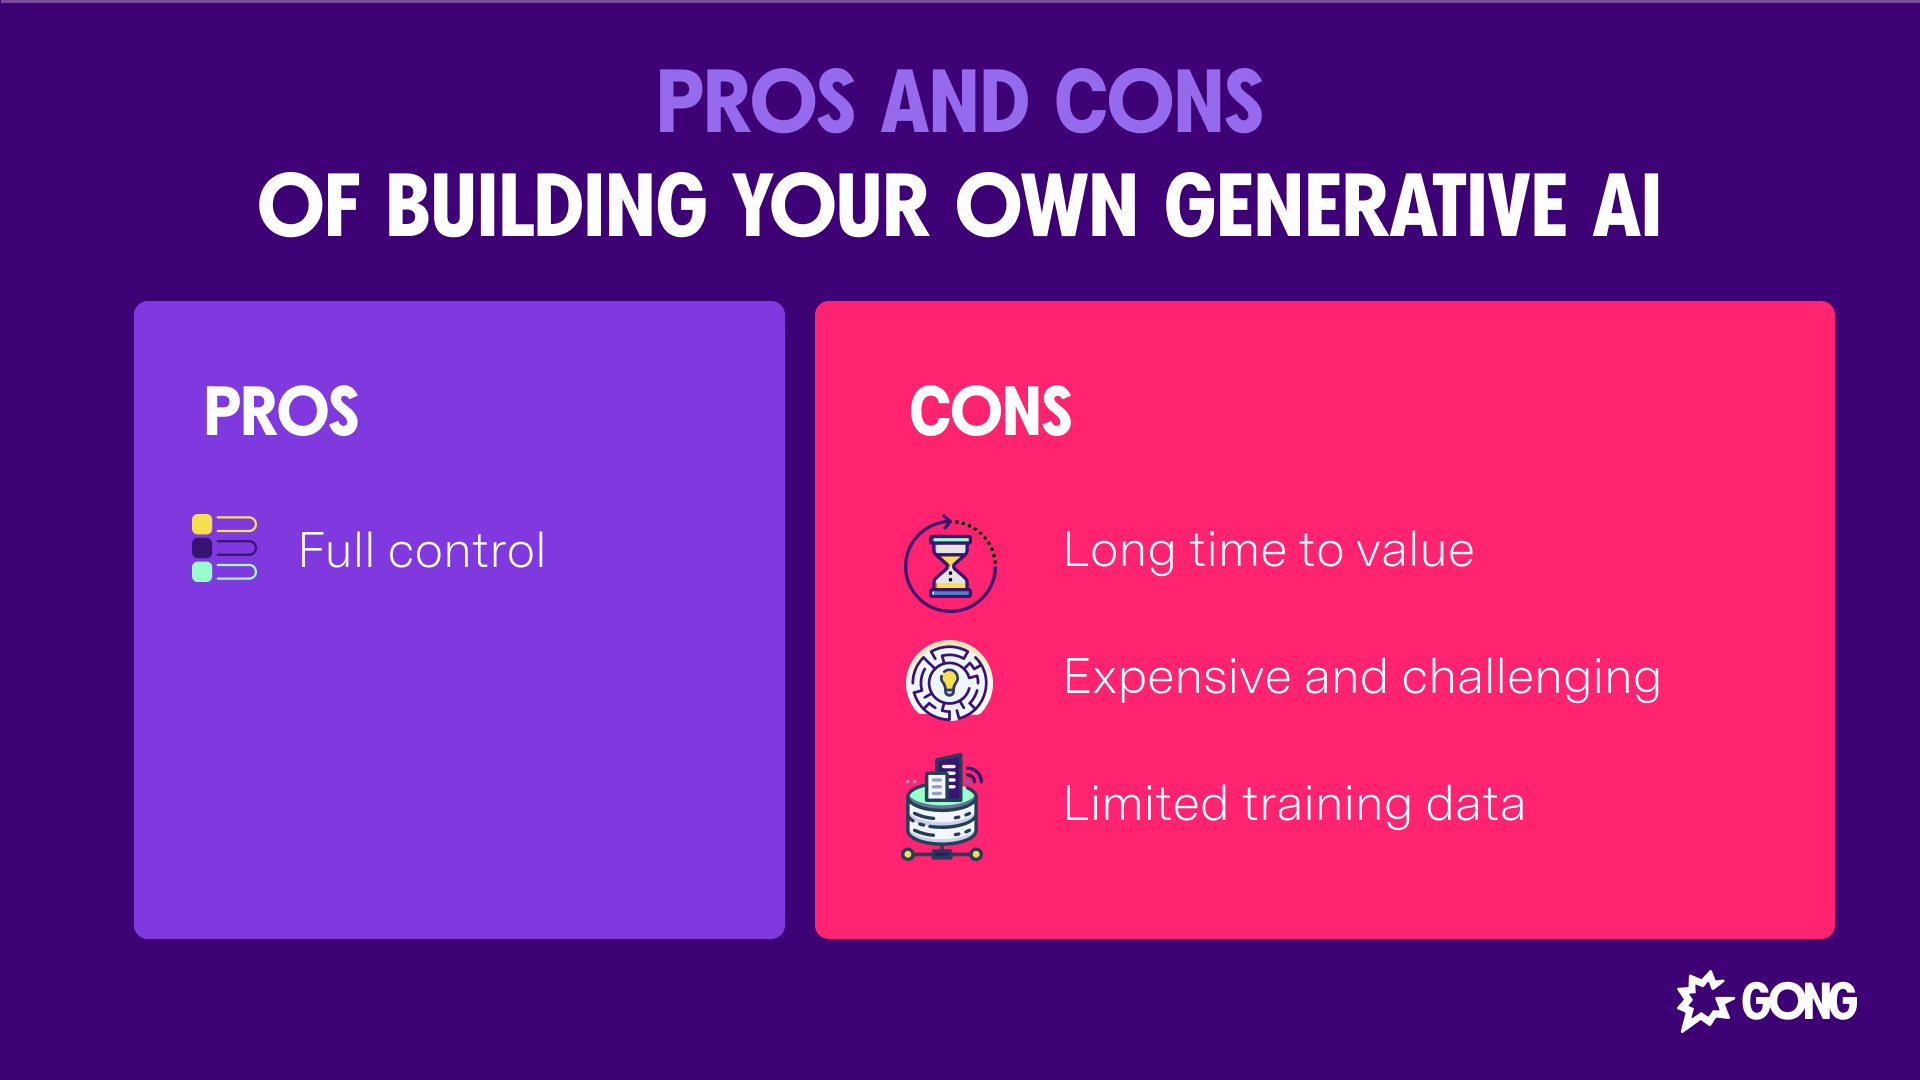 Table of the pros and cons of building generative AI internally